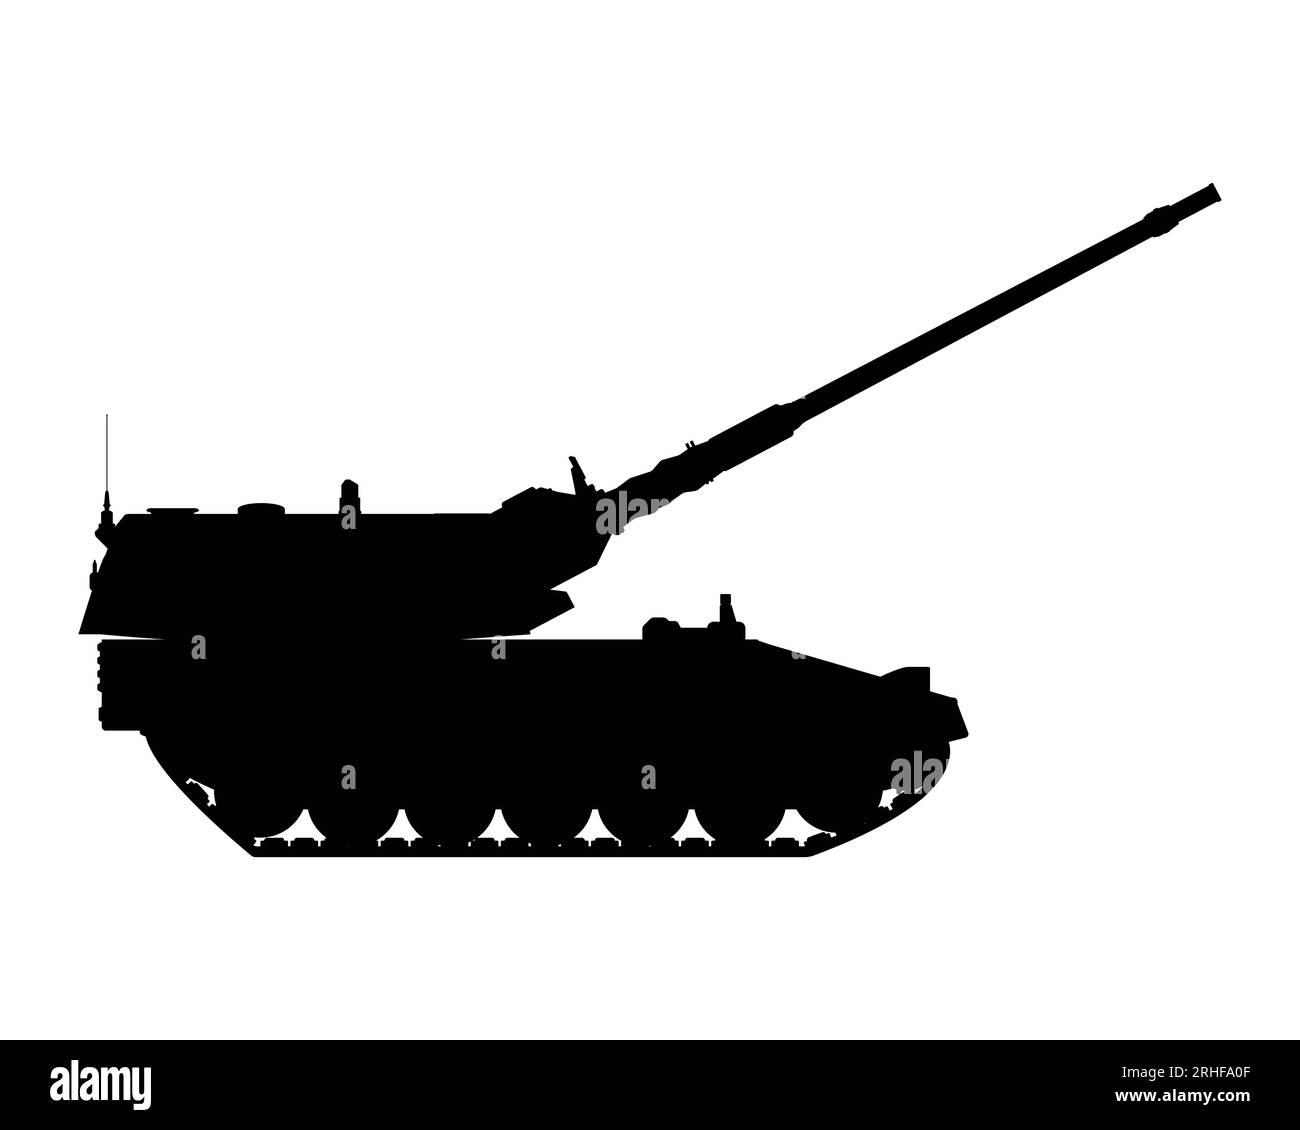 Self-propelled howitzer silhouette. Raised barrel. Military armored vehicle. Illustration isolated on white background. Stock Photo